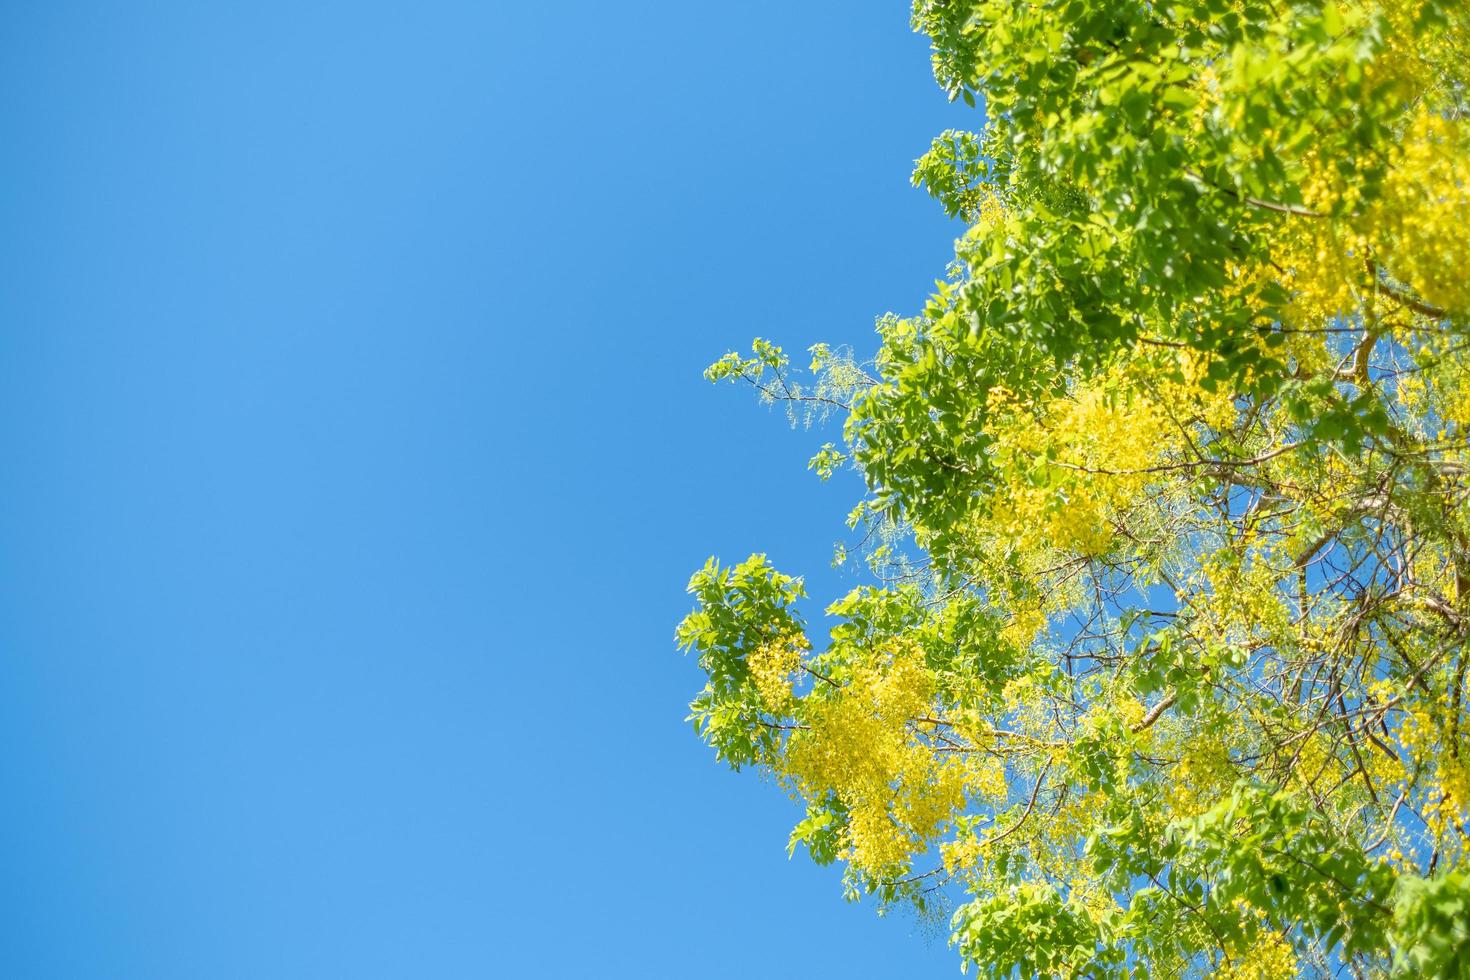 Golden shower tree, cassia fistula national flower of Thailand with a blue sky background photo